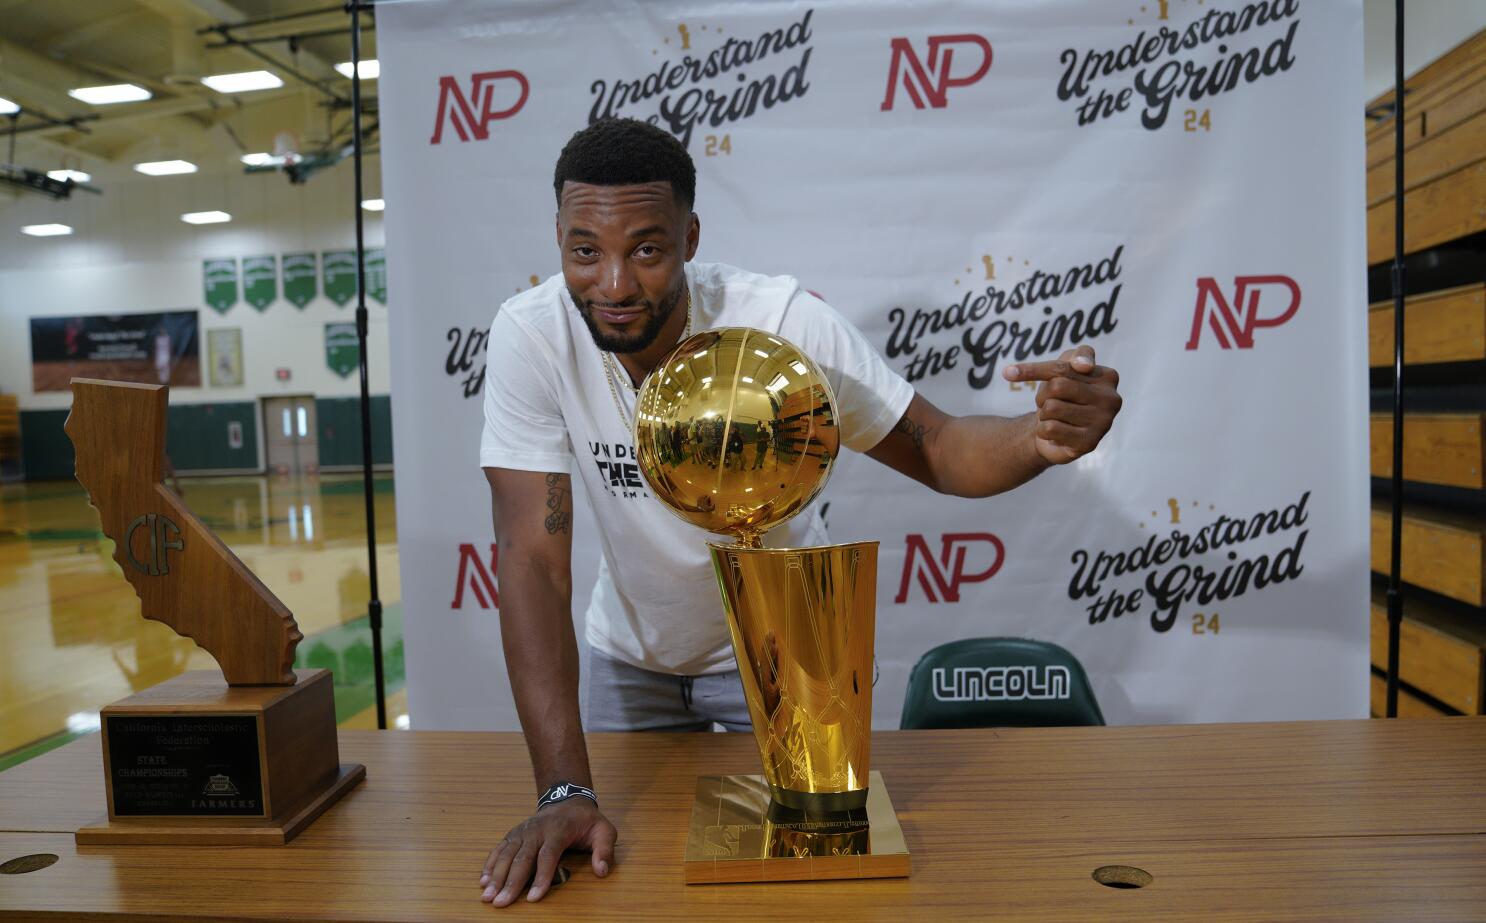 How Norman Powell Preps for the NBA Season With the Clippers